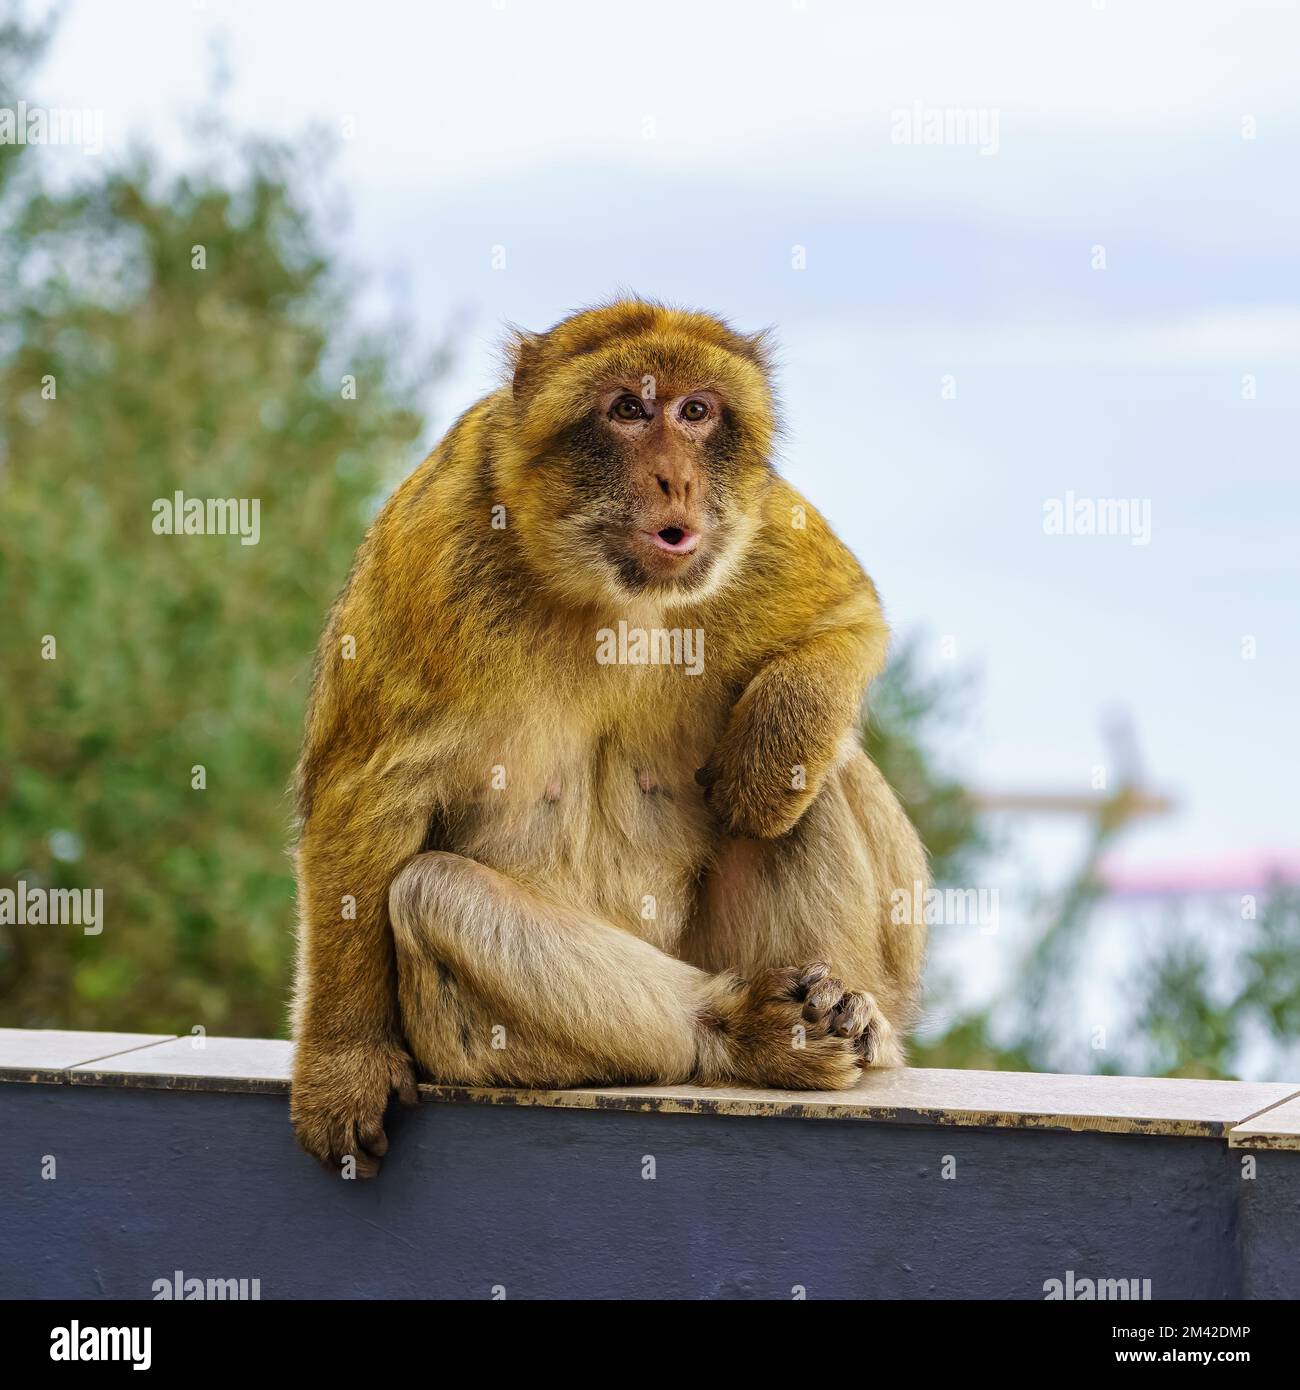 Gibraltar monkeys who live on top of the rock in the peninsula nature reserve. Stock Photo